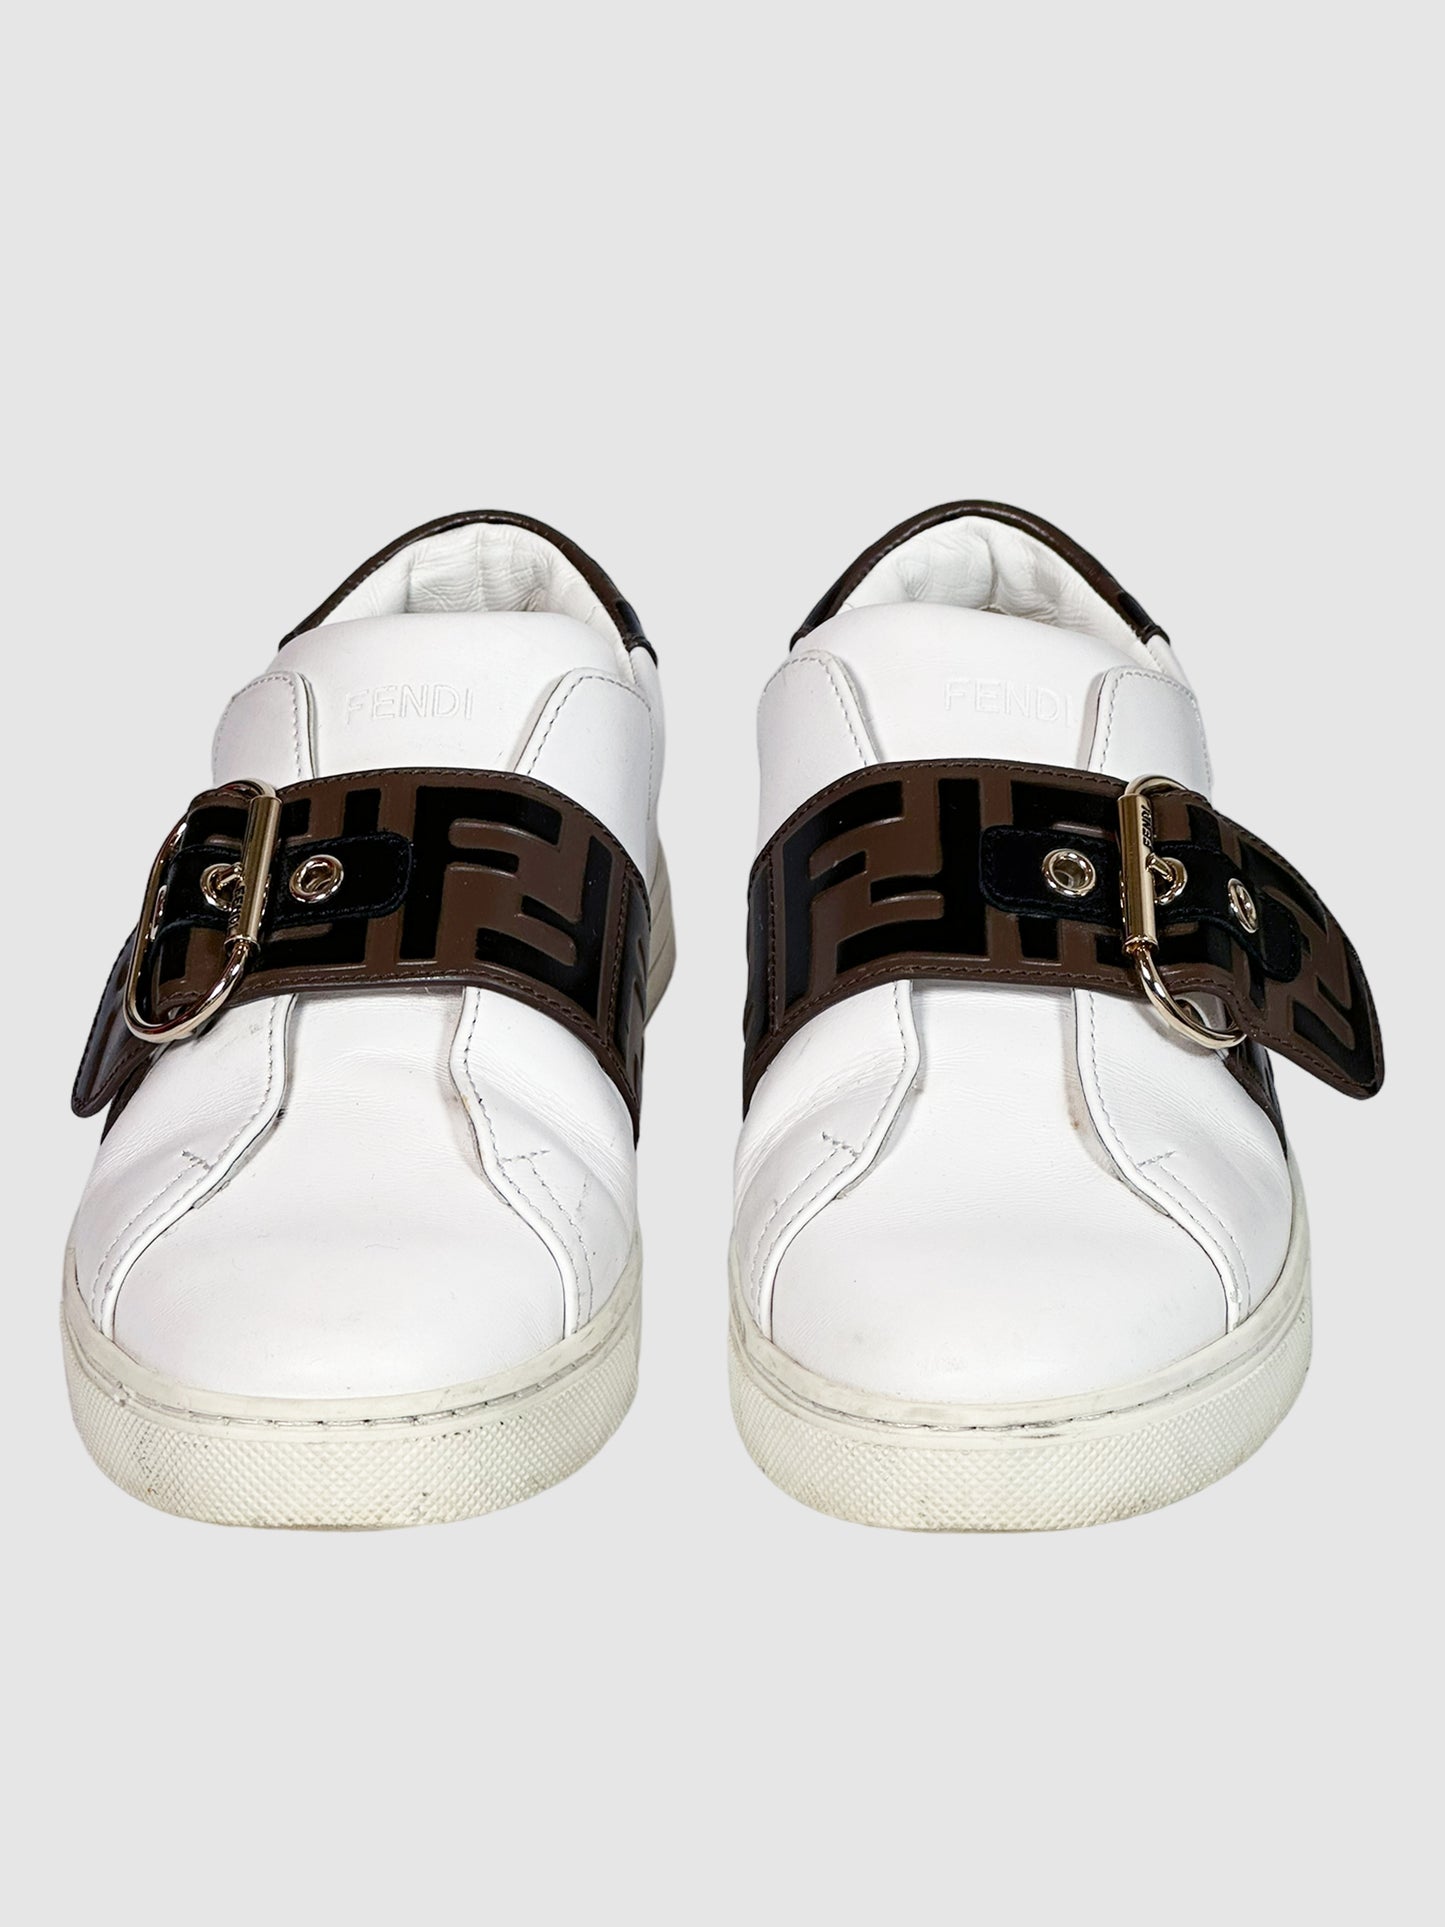 Fendi Leather Printed Sneakers - Size 37.5